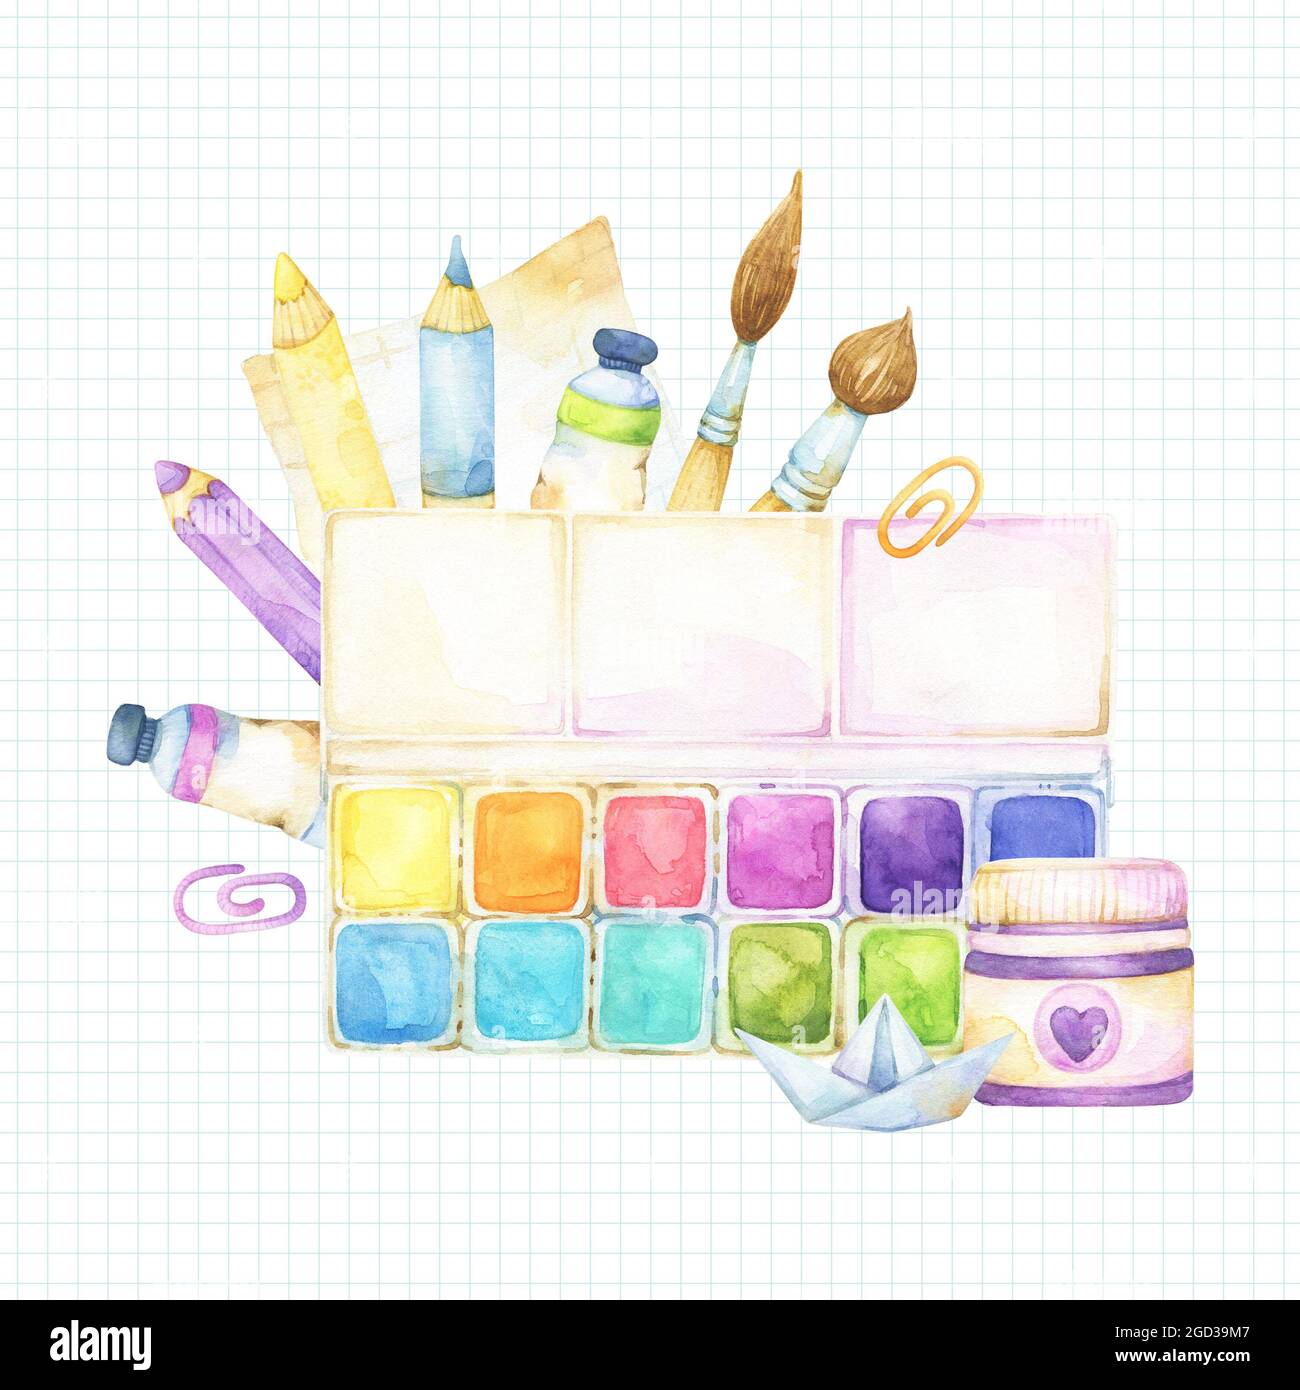 Square template with art supplies watercolor illustration on